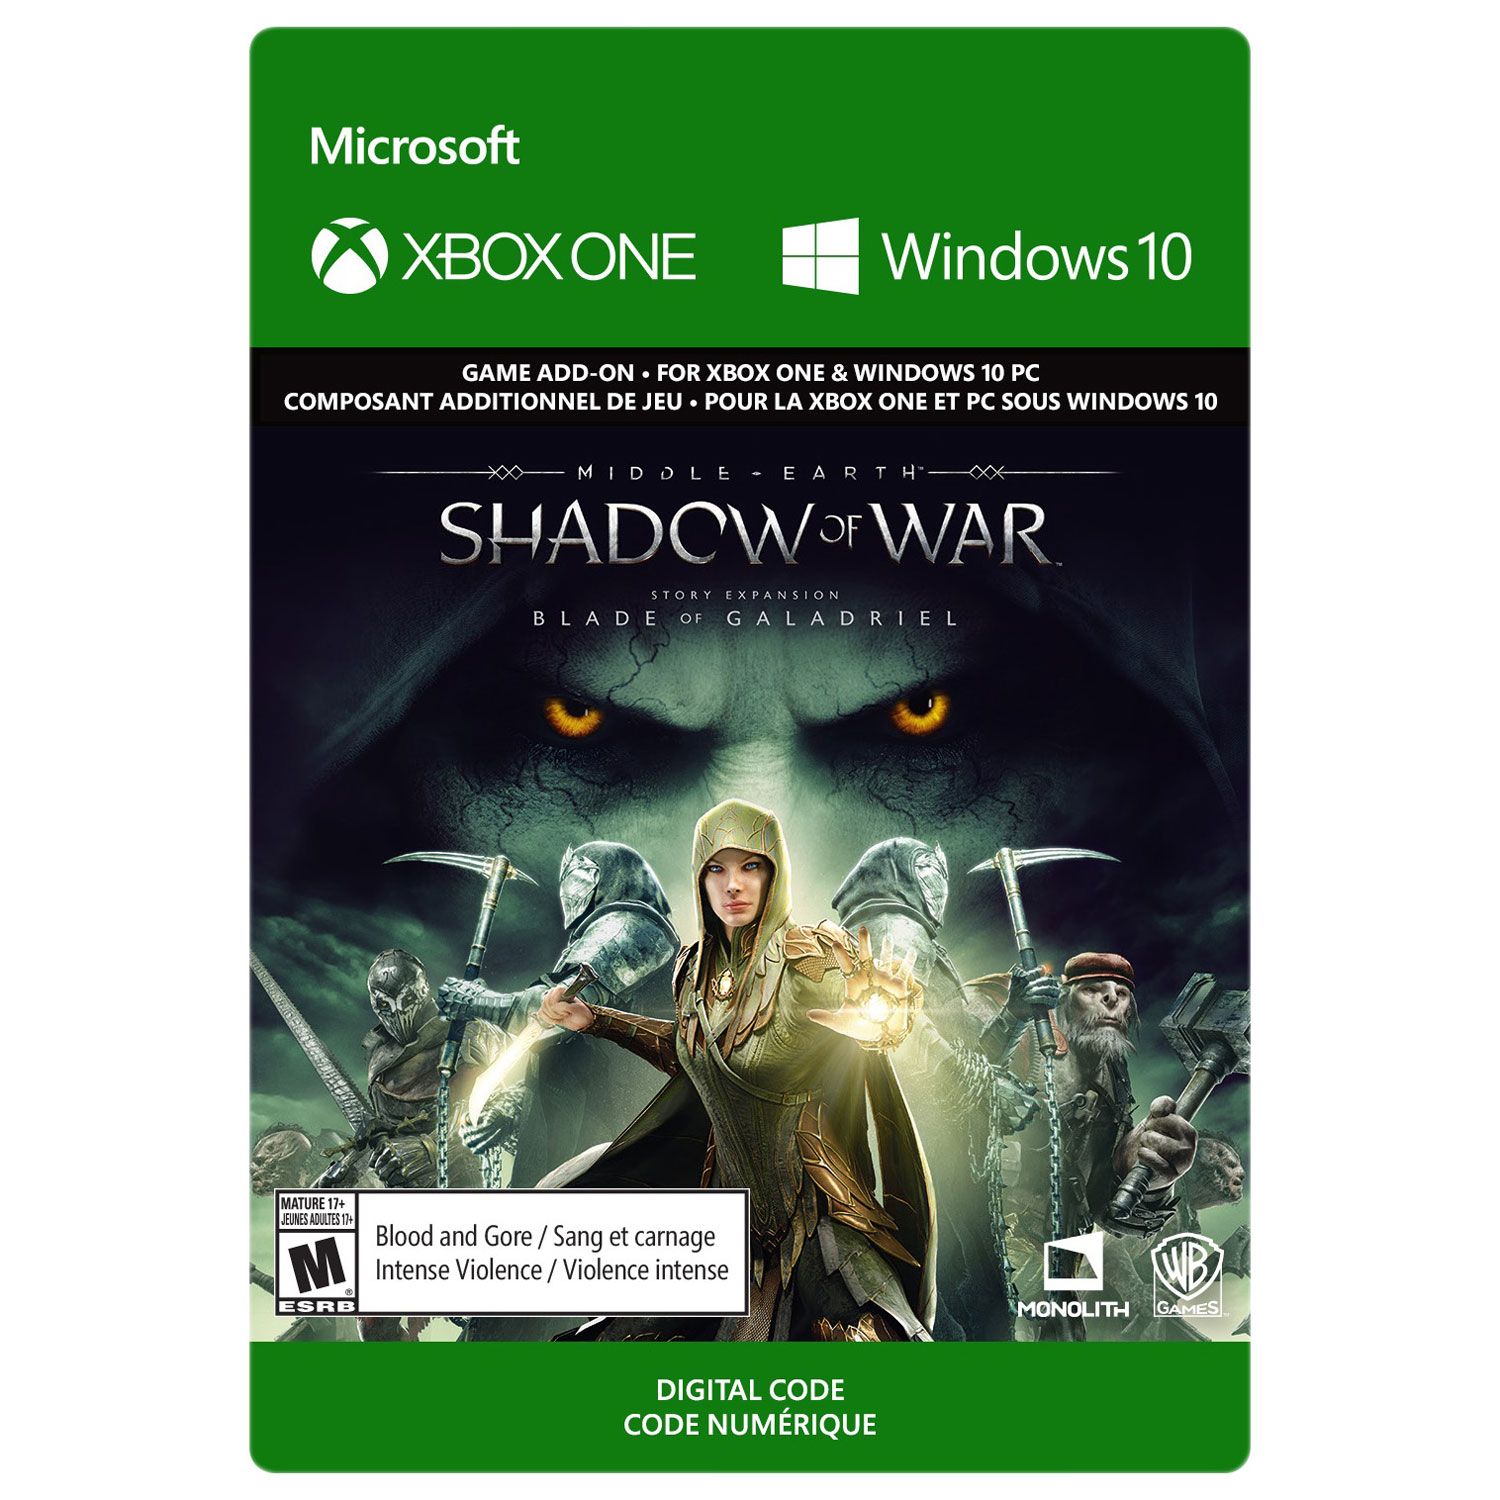 Middle Earth: Shadow of War Blade of Galadriel (Xbox One) - Digital Download